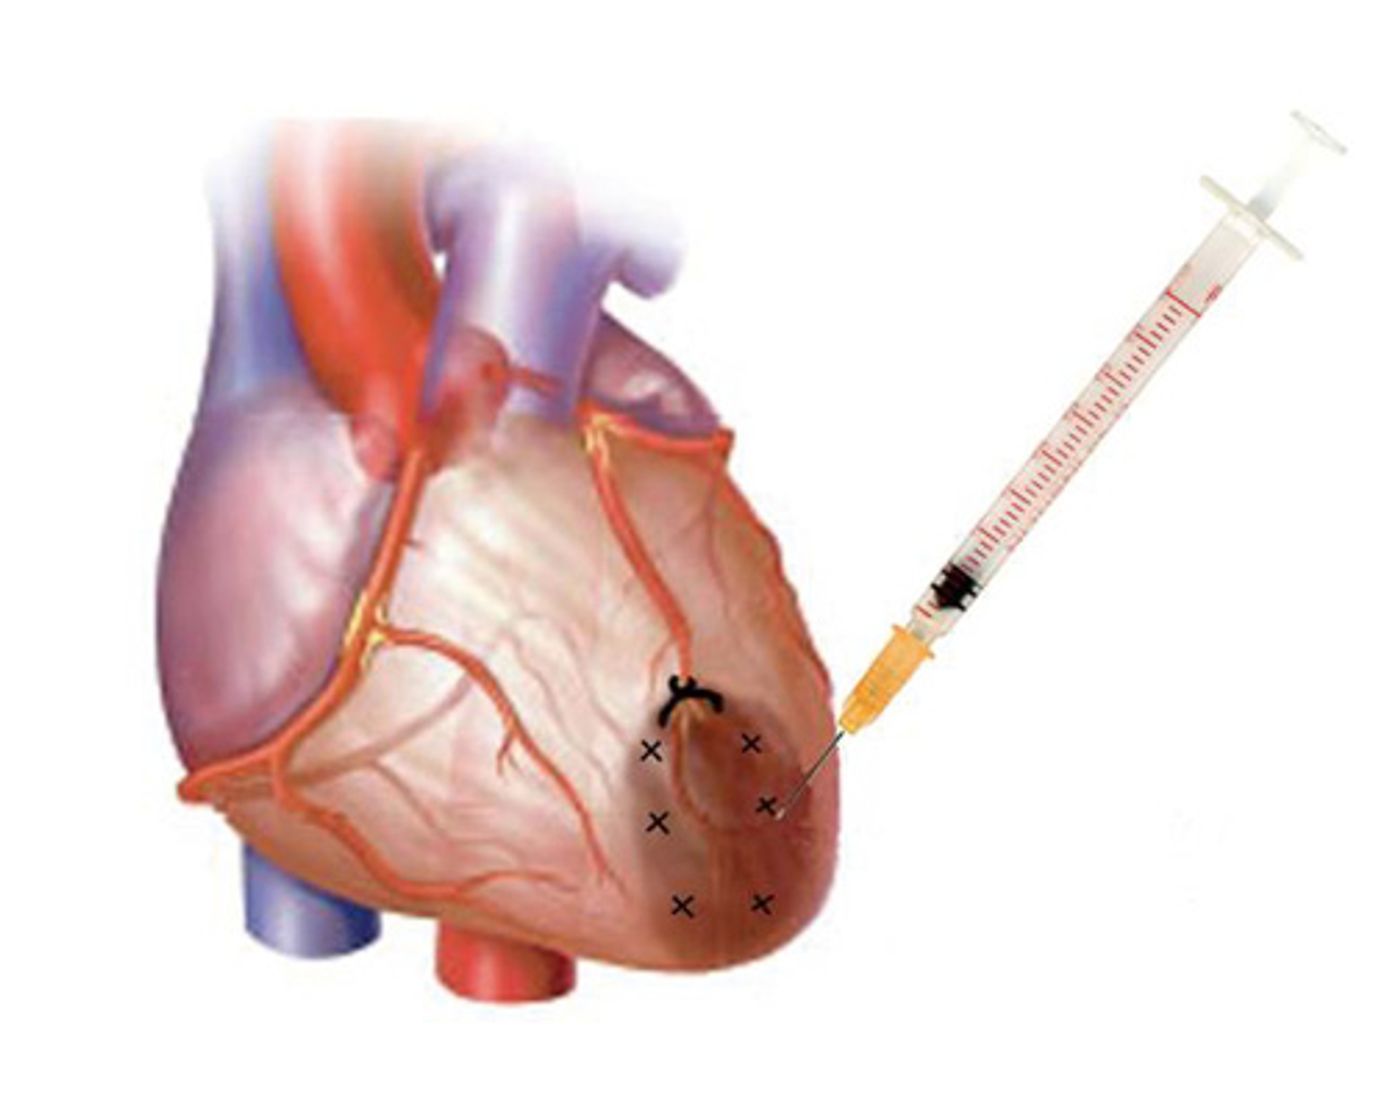 Intramyocardial Injection